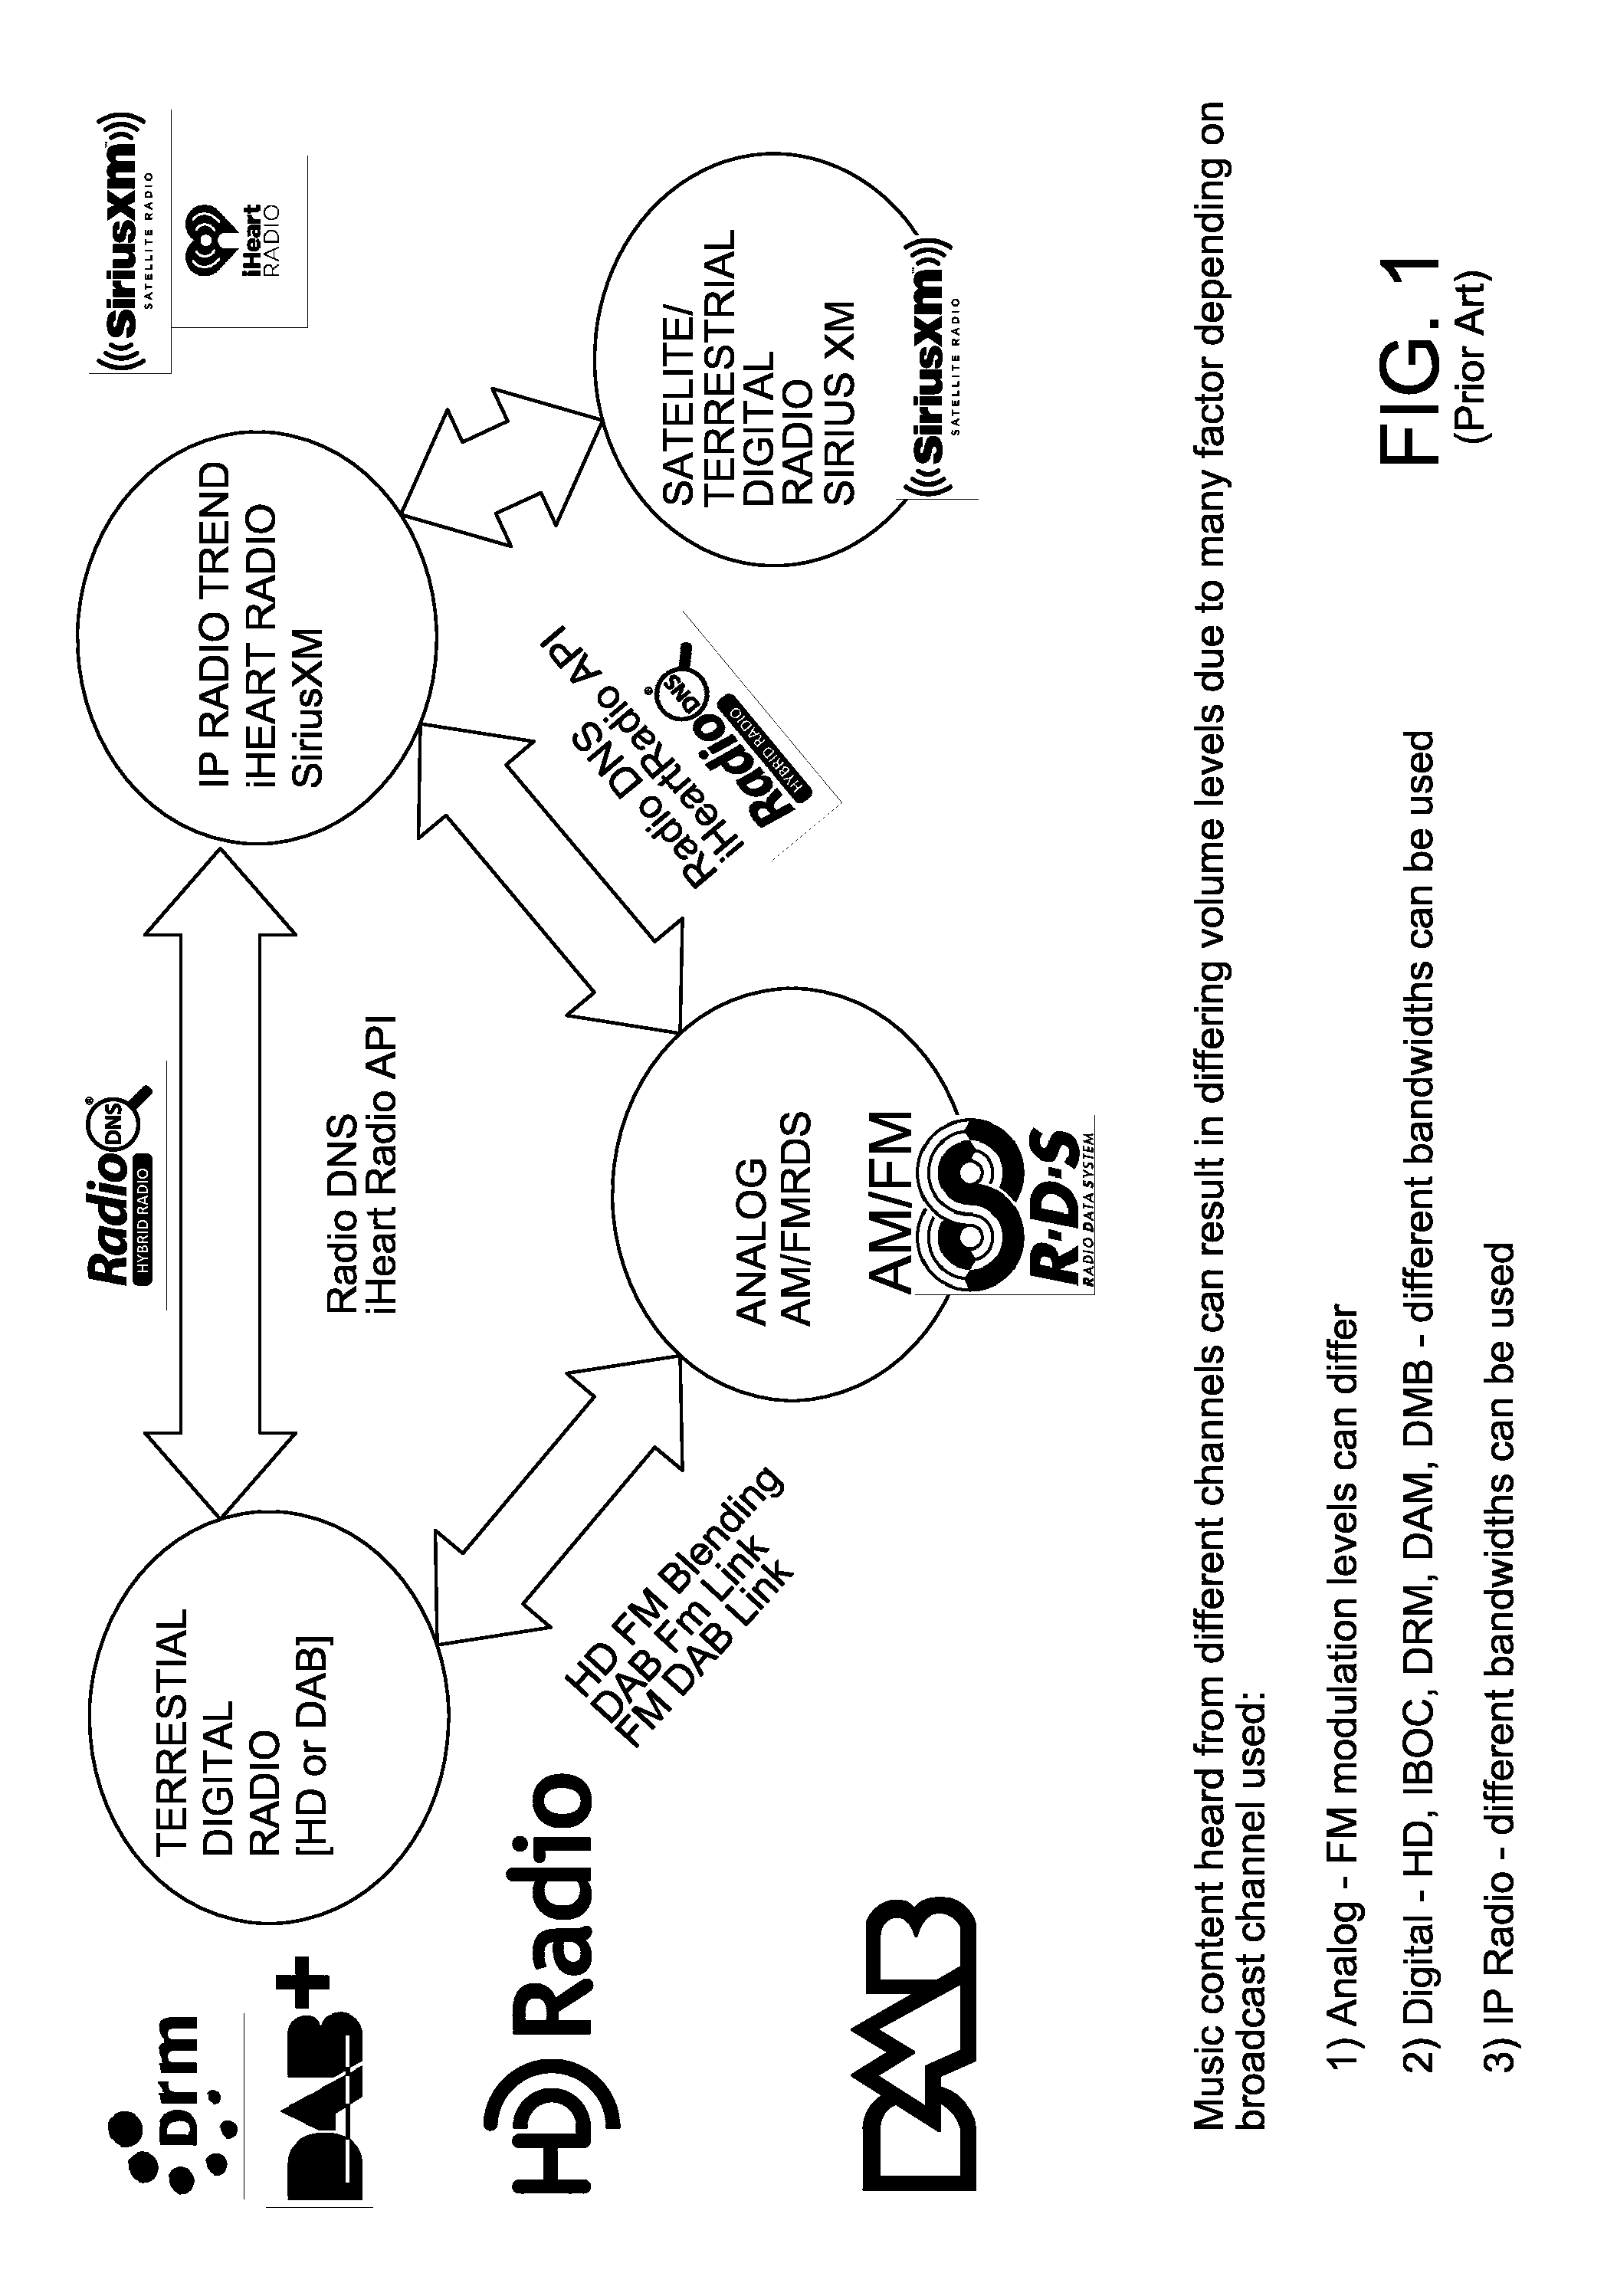 Method and apparatus for mode balance for analog FM, digital radio blend logic in an automotive environment